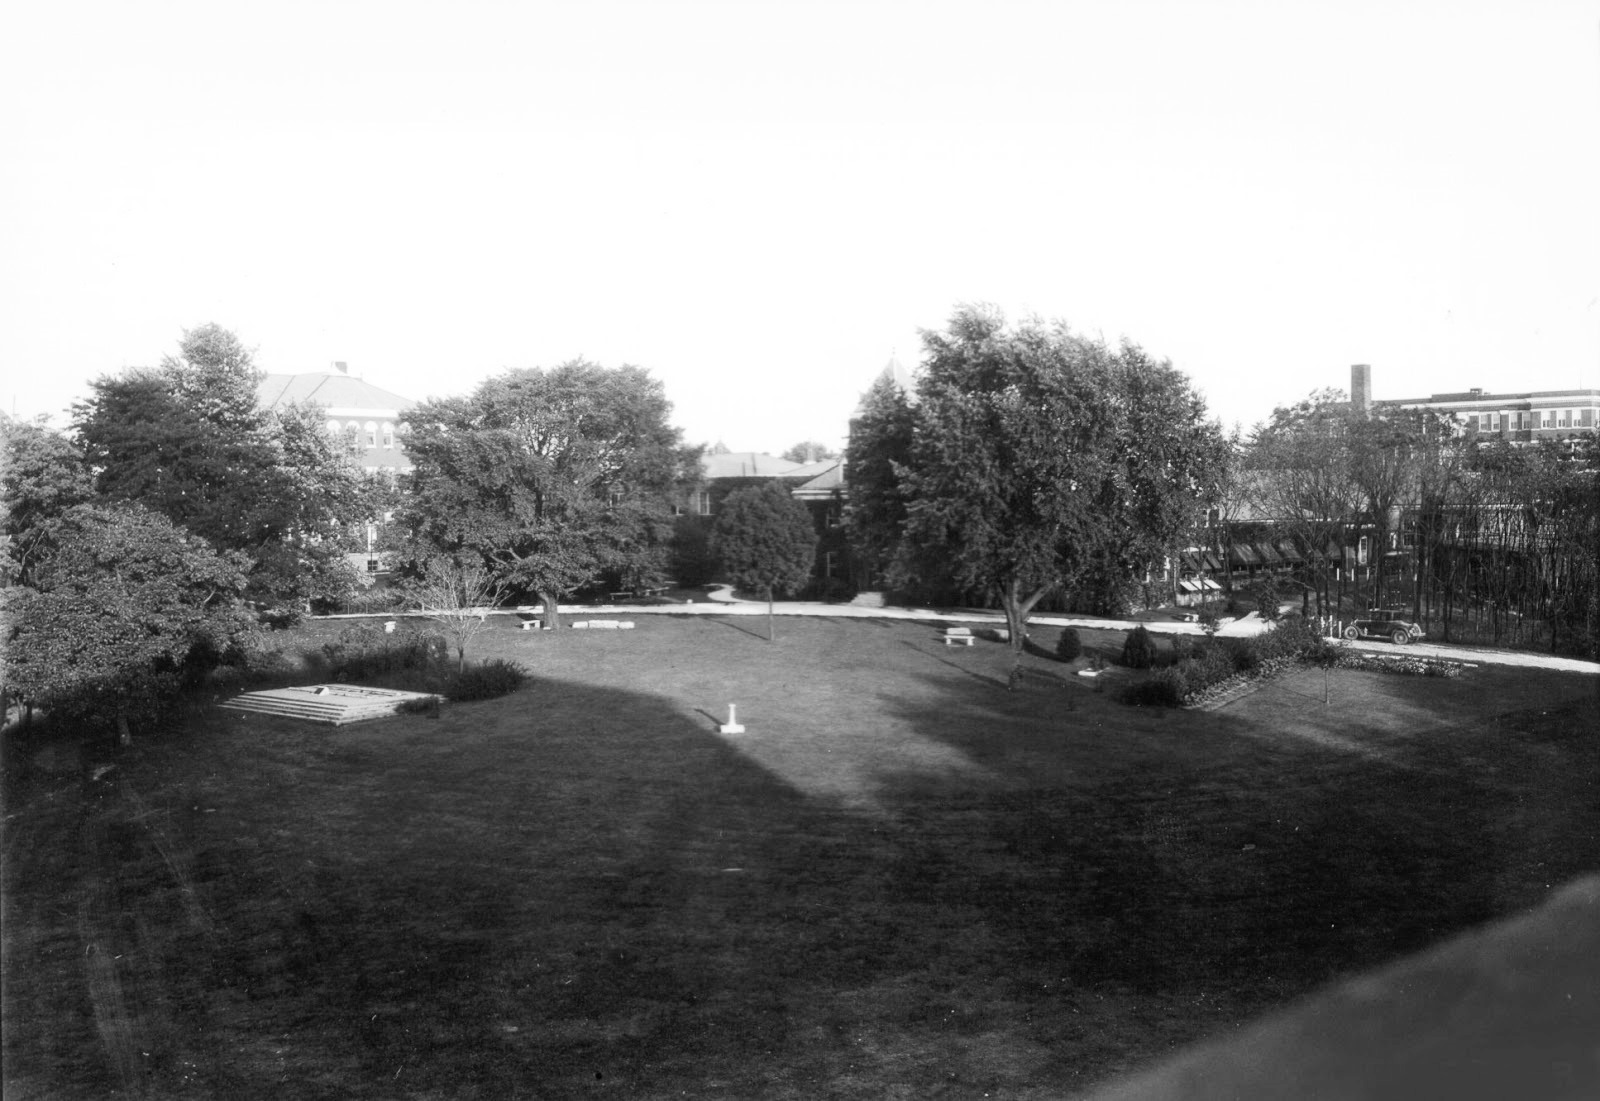 About 25 feet of the original track was to be set on a concrete base on the campus of the university, in front of Mechanical Hall (razed in 1964 to make room for the F. Paul Anderson Tower). Here the memorial sits to the left with Mechanical Hall in the center and the Science (now Miller) Building on the right. Photo courtesy of UK Special Collections.